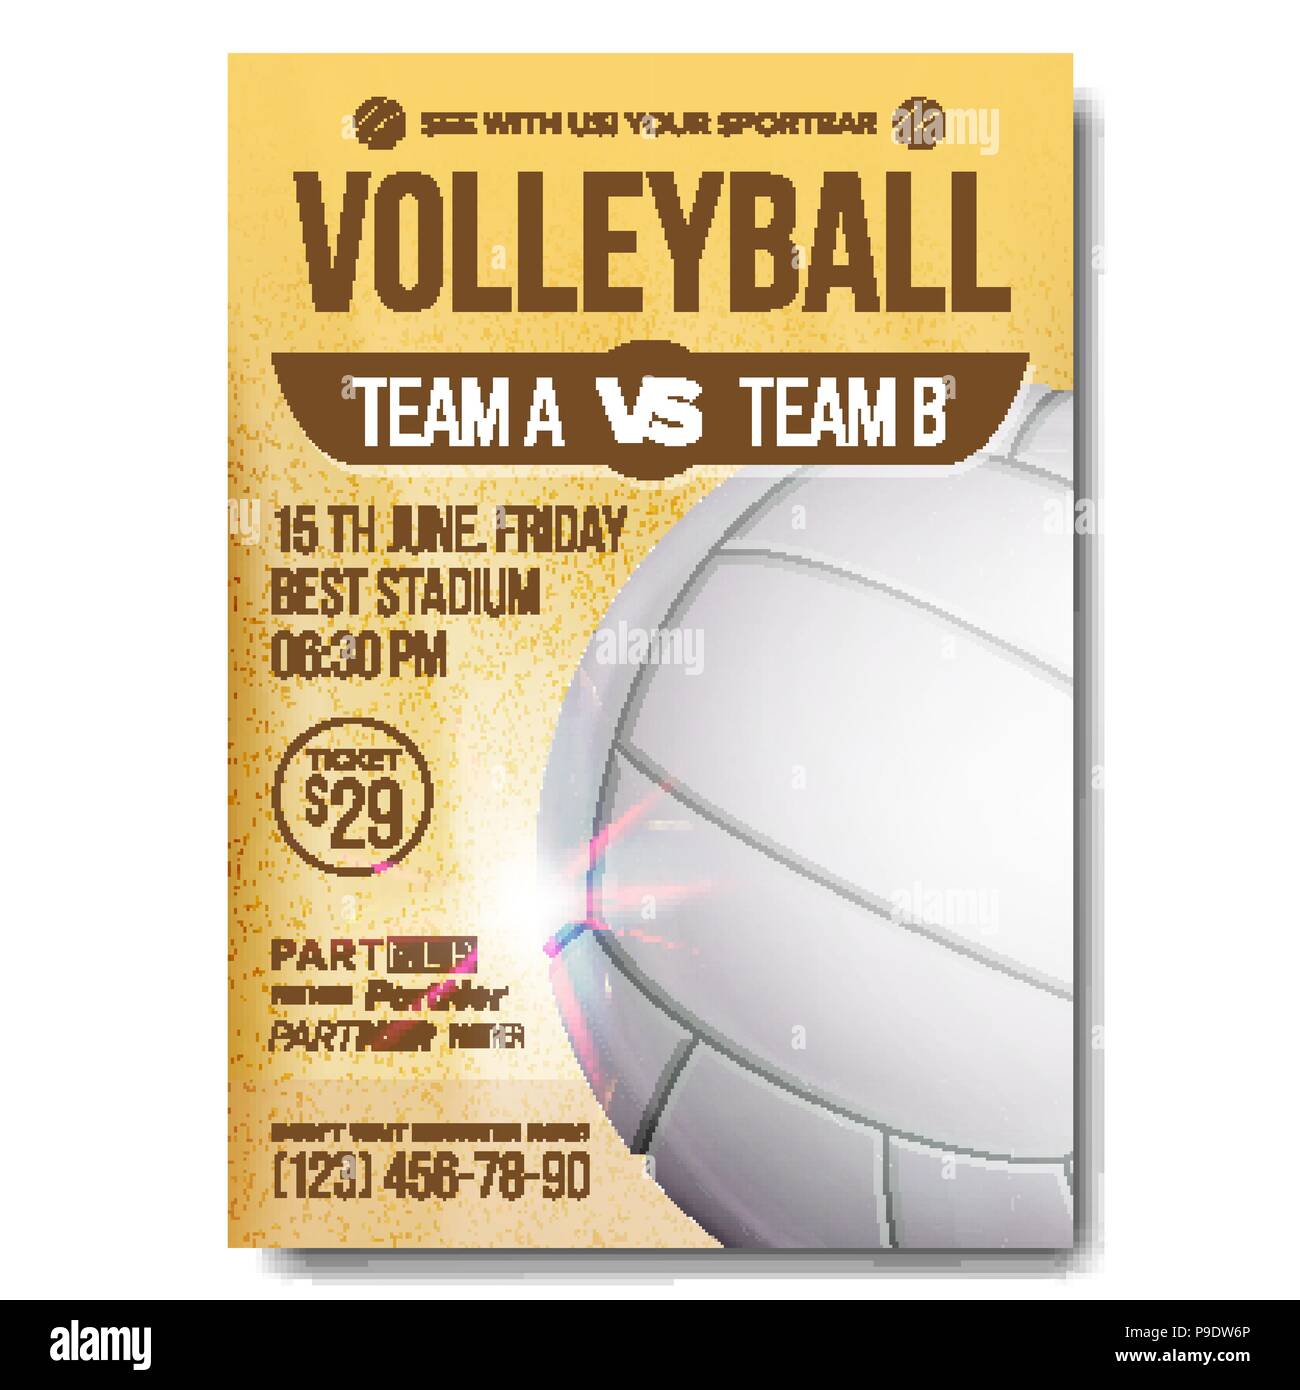 Volleyball Poster Vector. Banner Advertising. Sand Beach, Net. Sport Event Announcement. A4 Size. Game, League Design. Volley. Championship Label Illustration Stock Vector